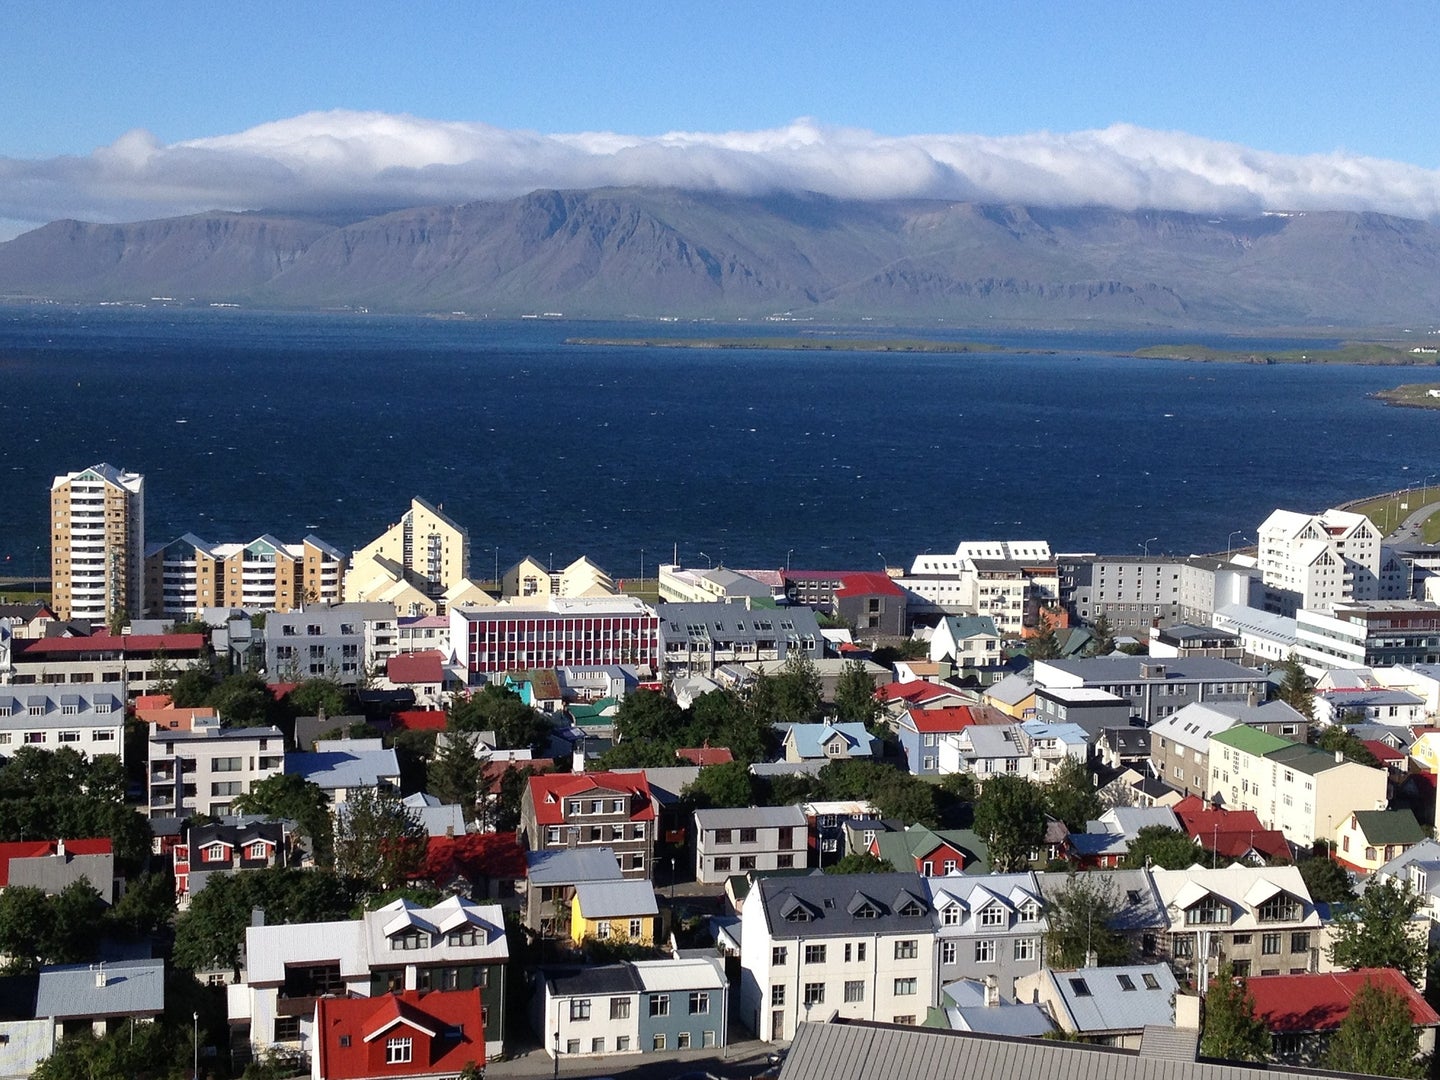 Iceland is one of a few countries that has taken on the degrowth ideal of measuring social wellbeing over GDP growth. 